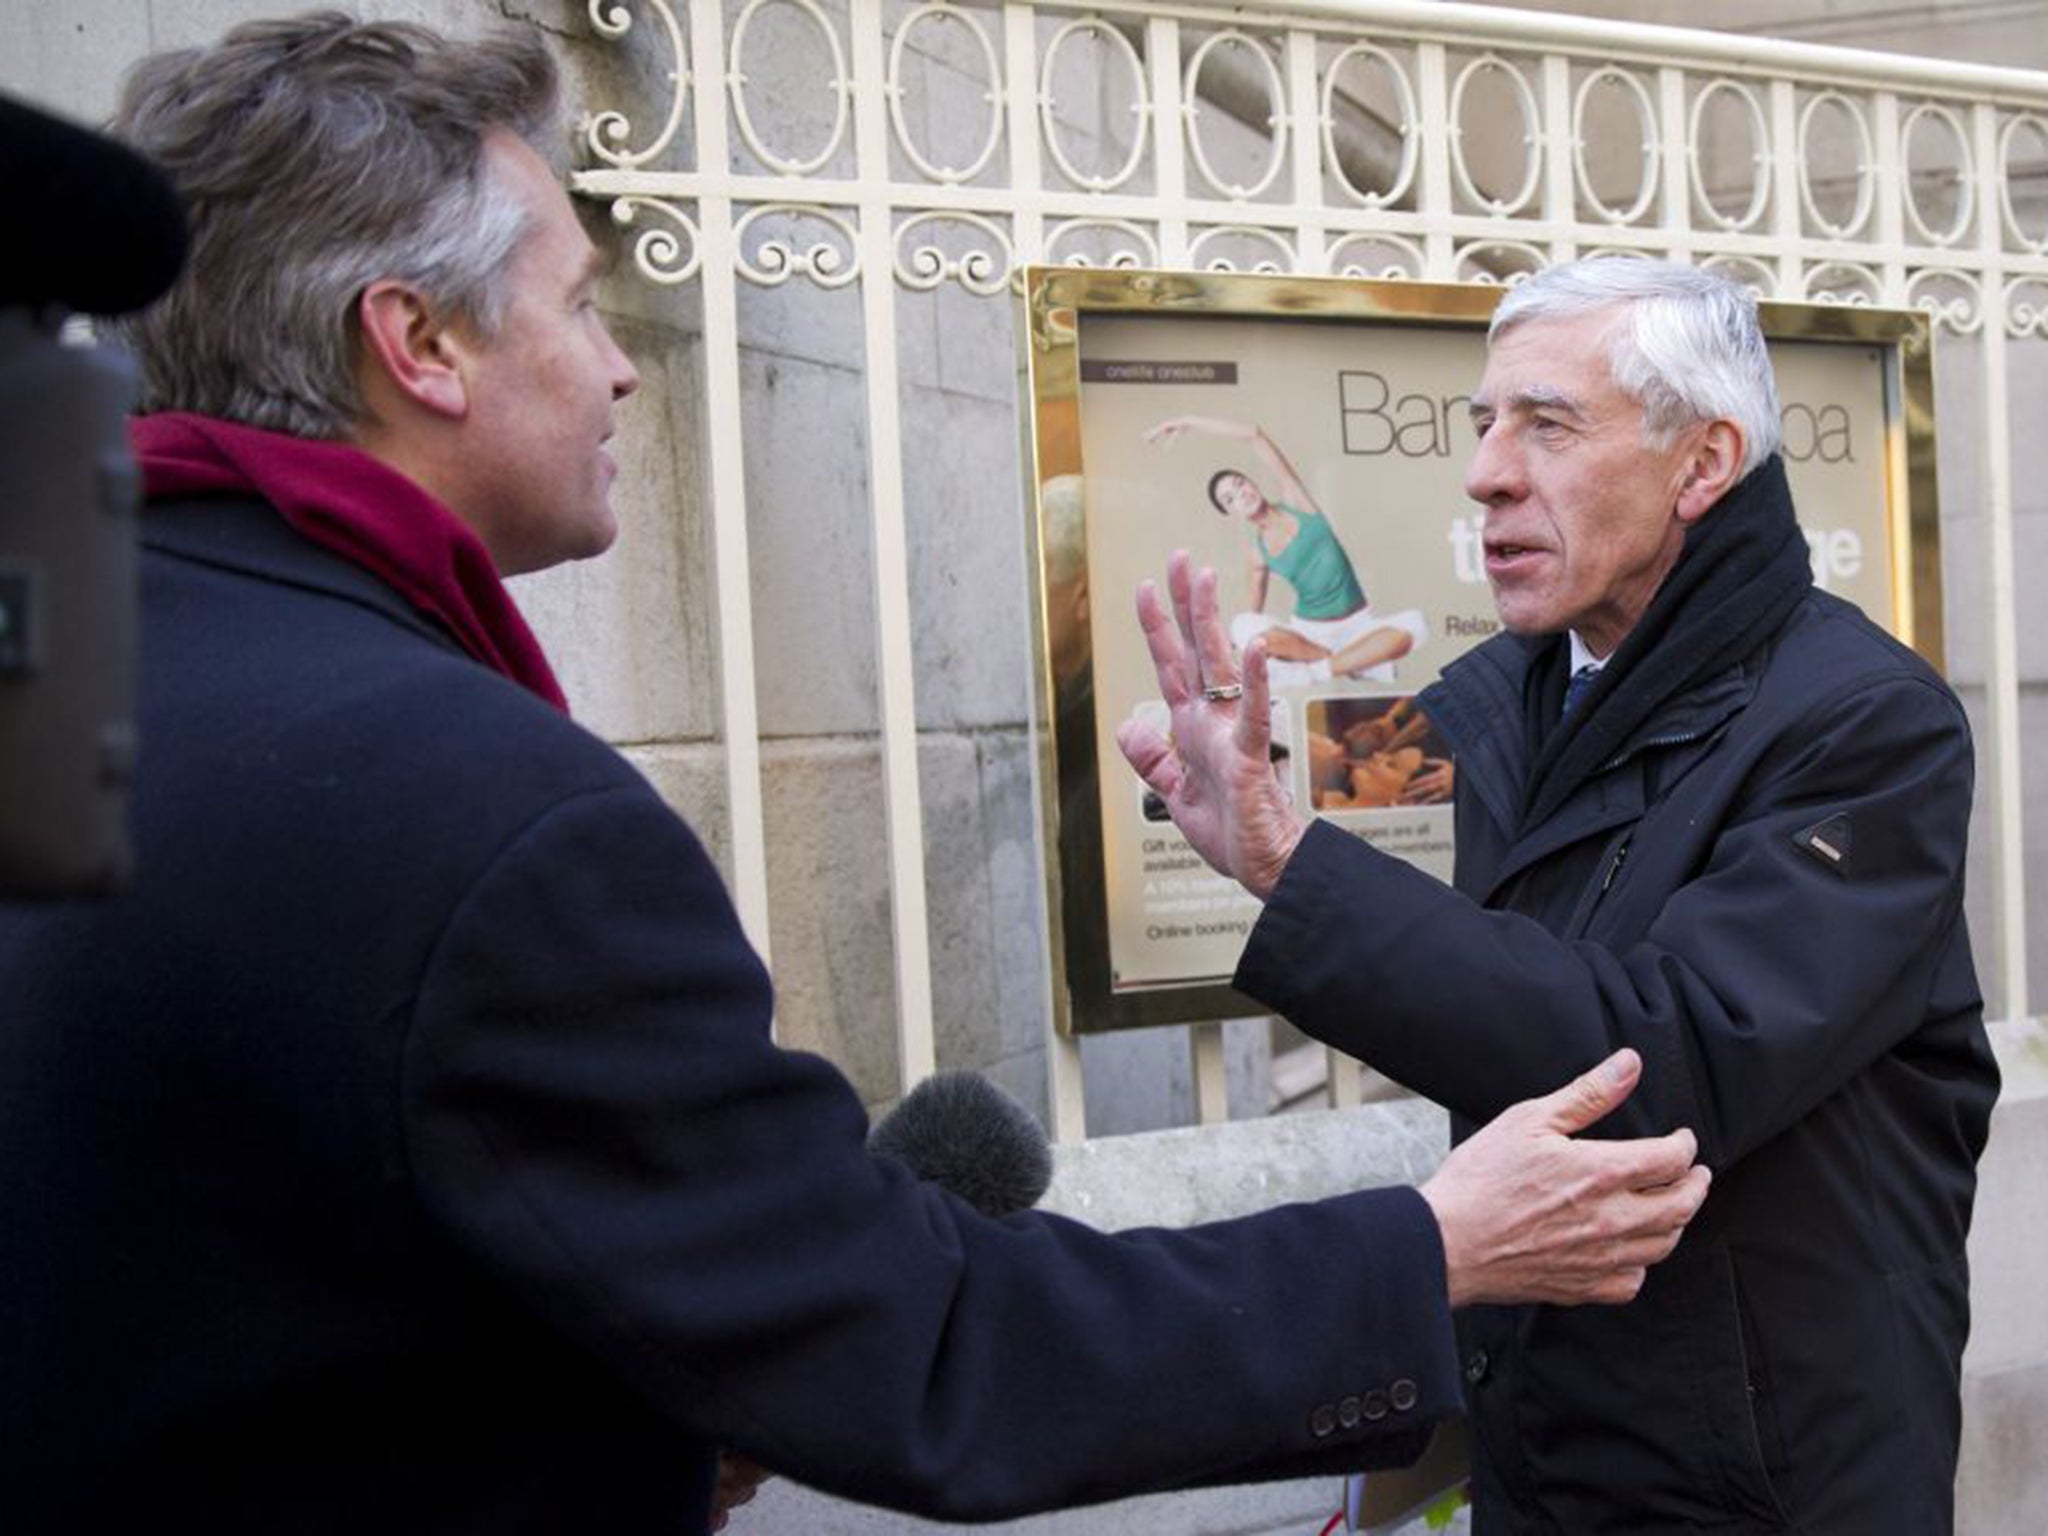 Jack Straw meets journalists as he arrives at Millbank Studios to carry out interviews over the cash for access scandal